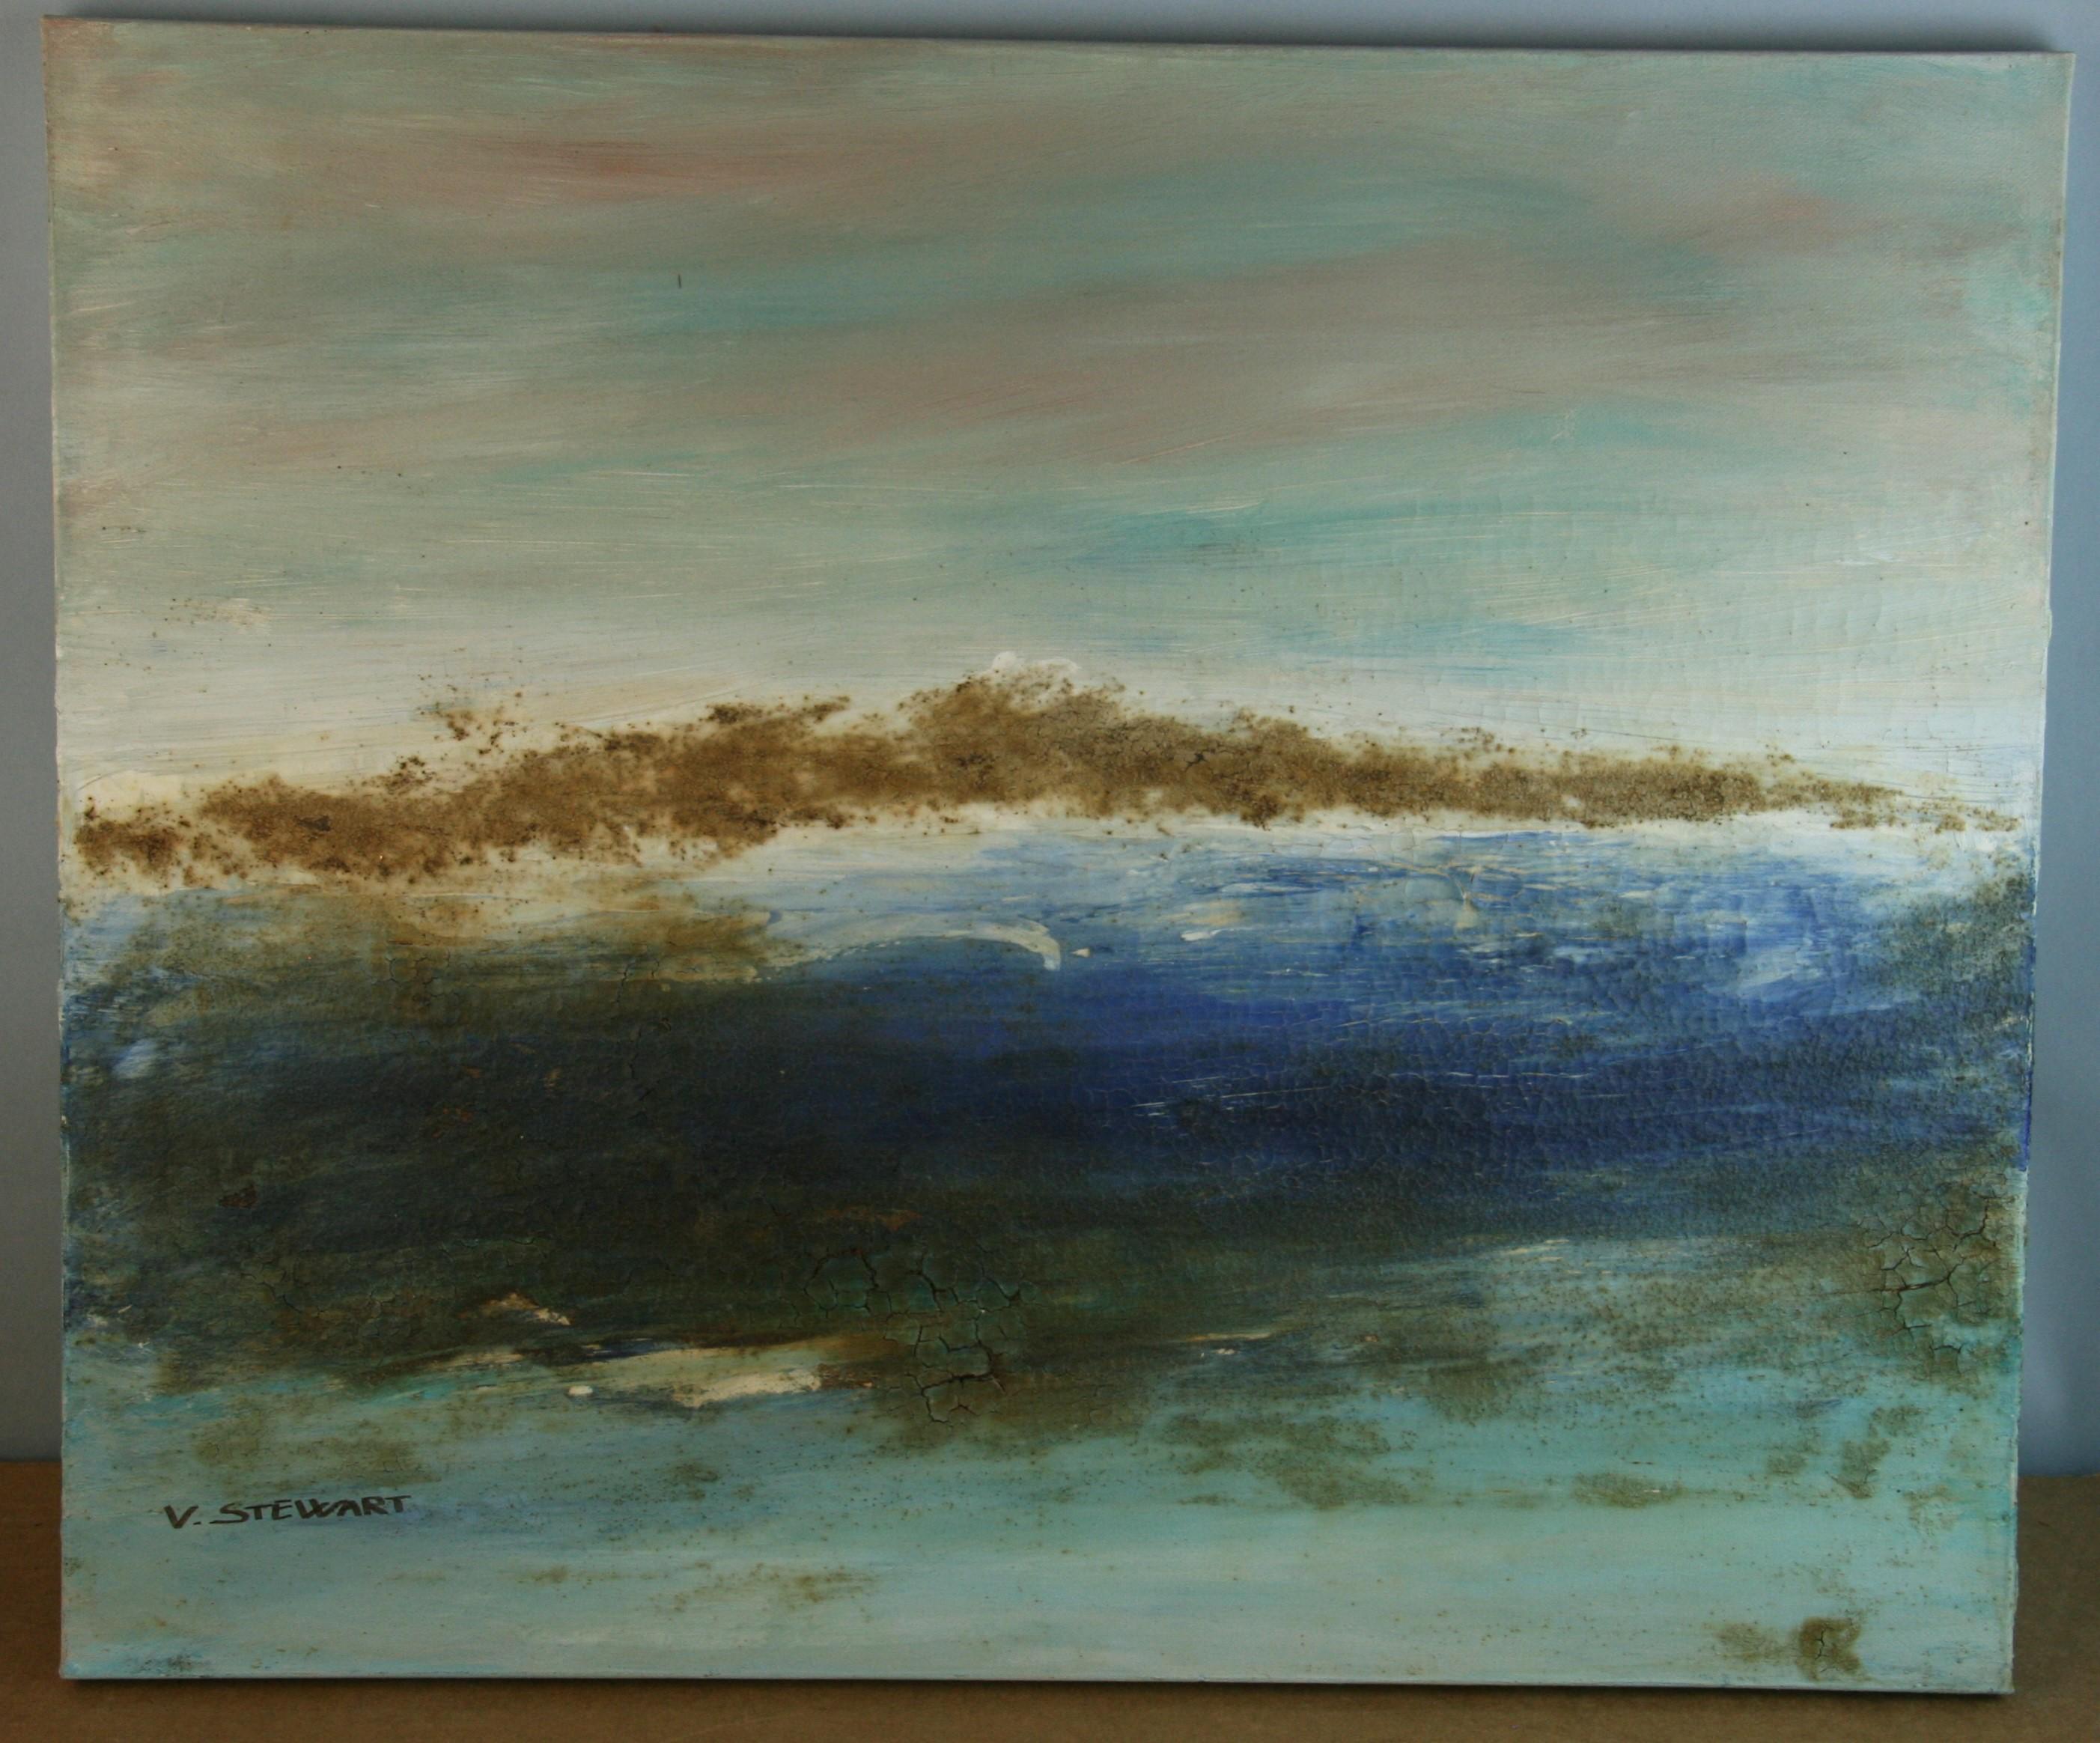 V.Stewart Abstract Painting - California Impressionist Seascape Painting